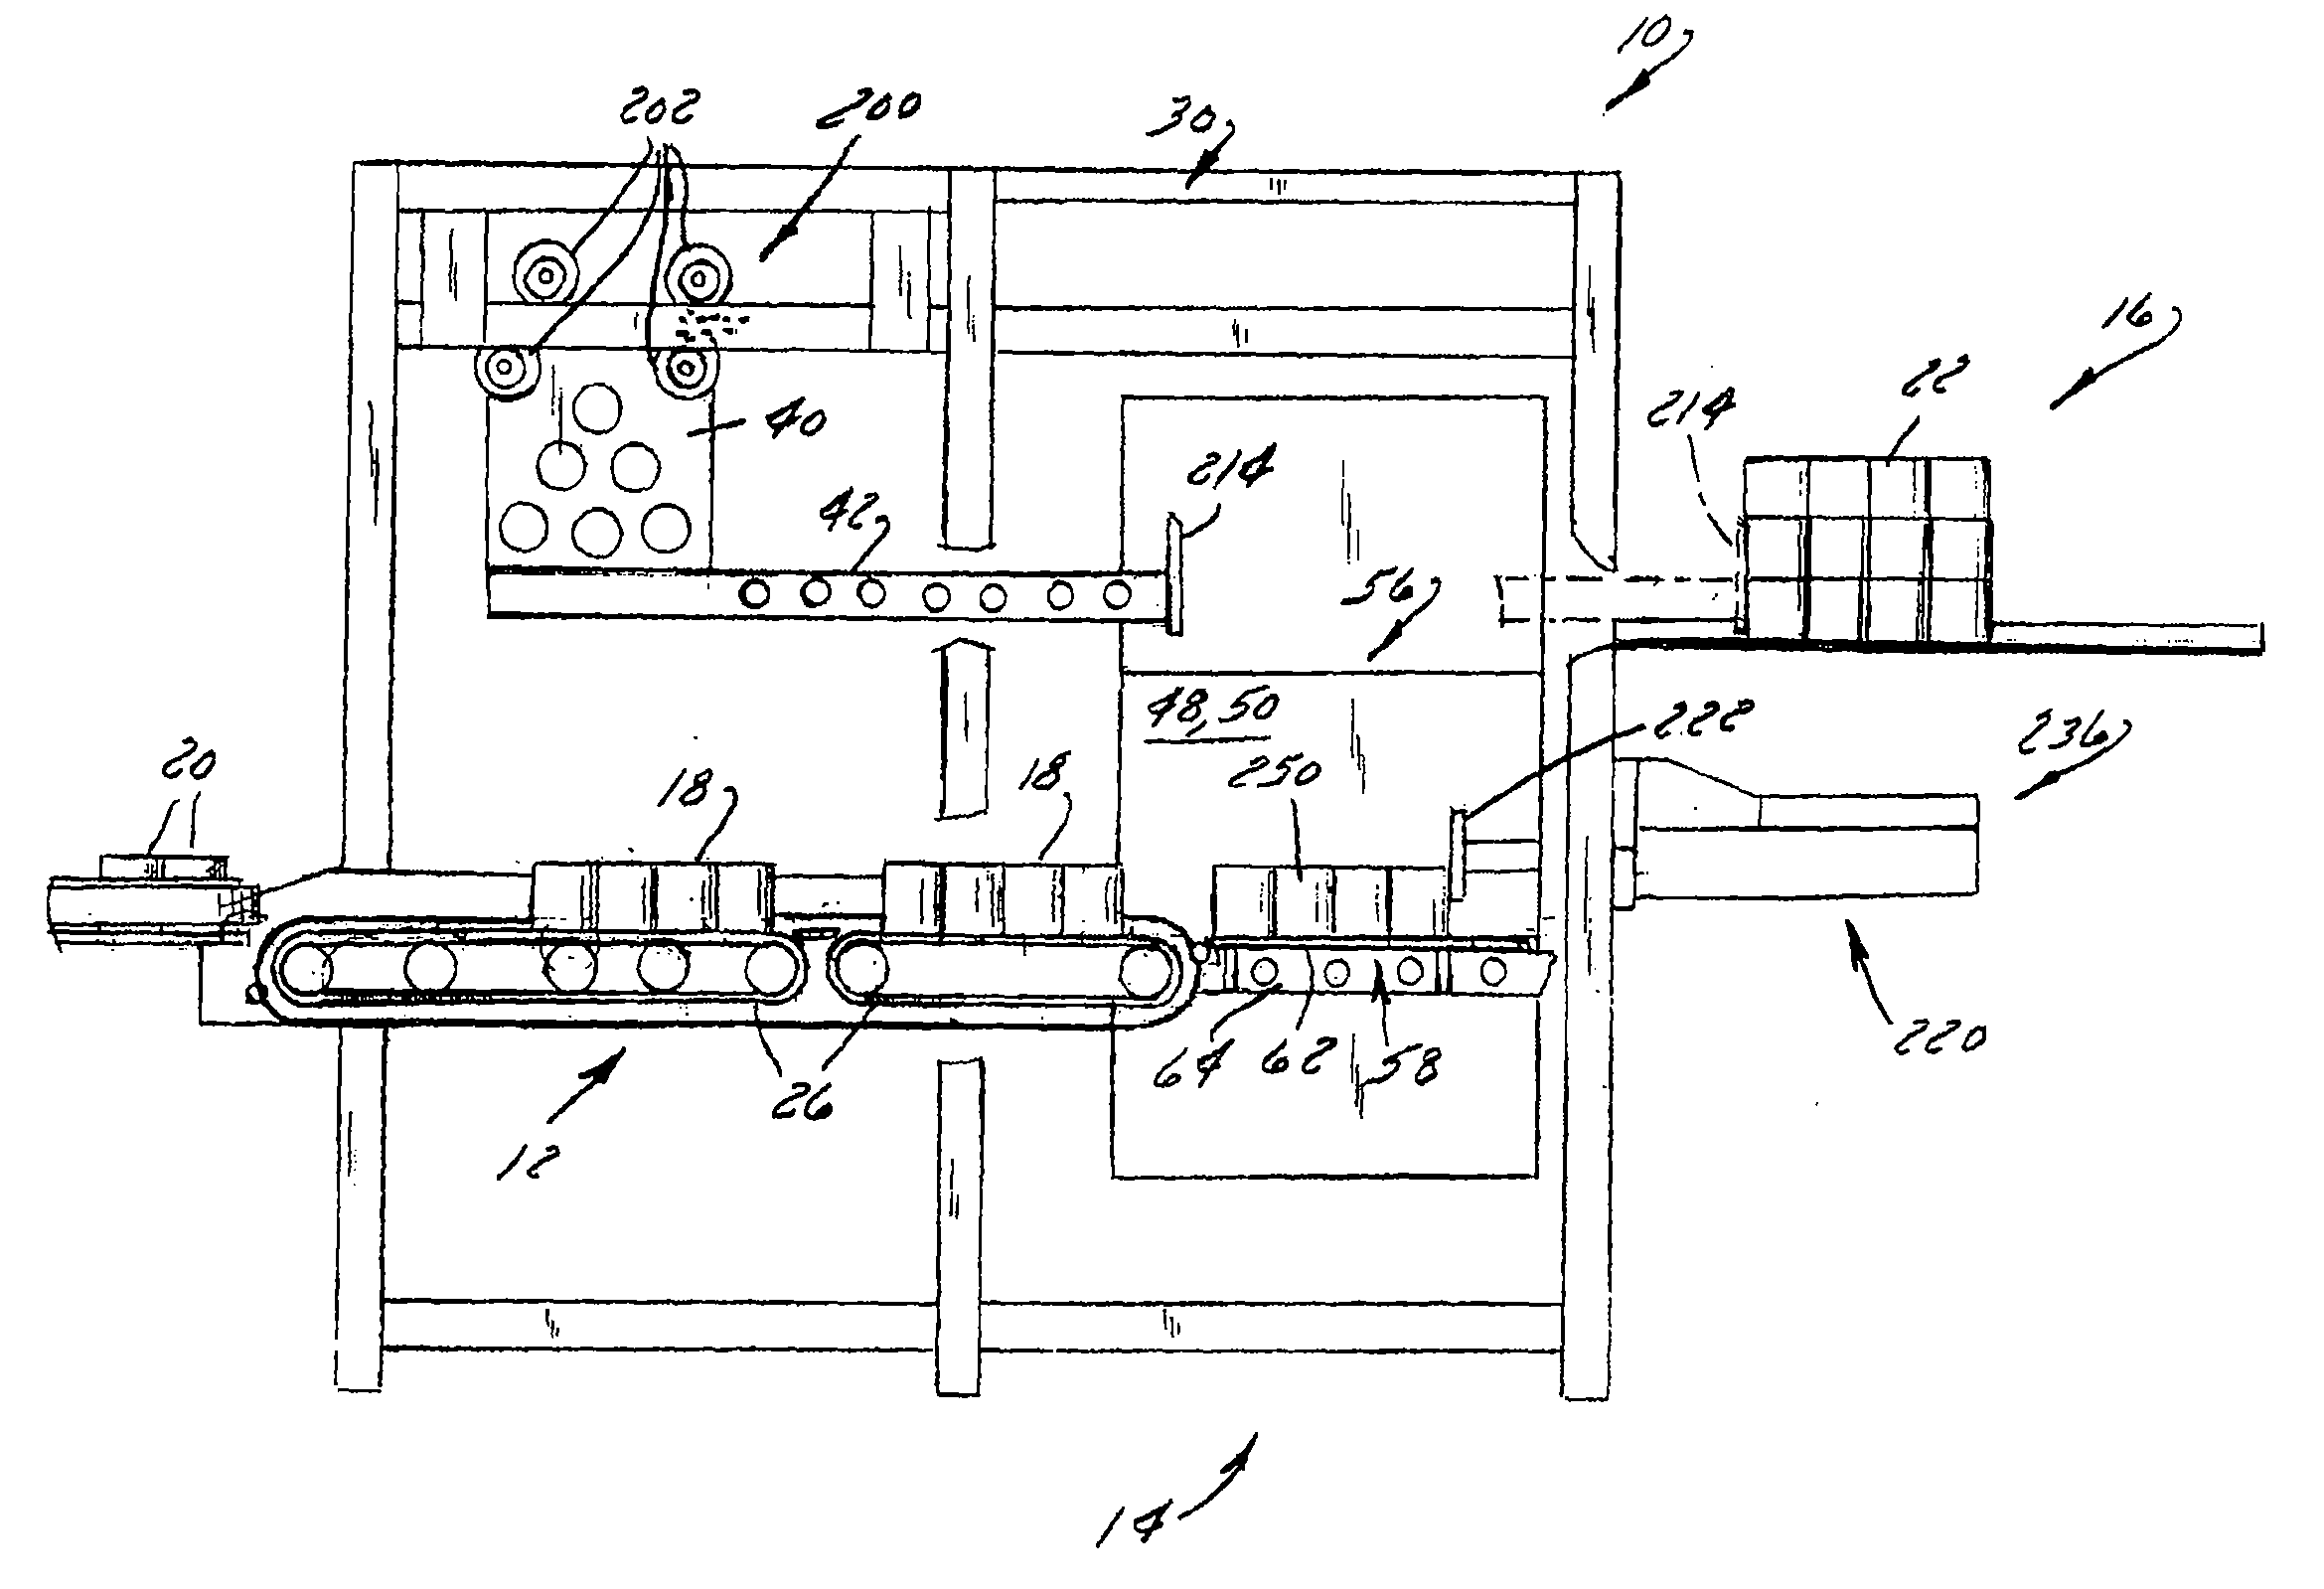 Article stacking and packaging system